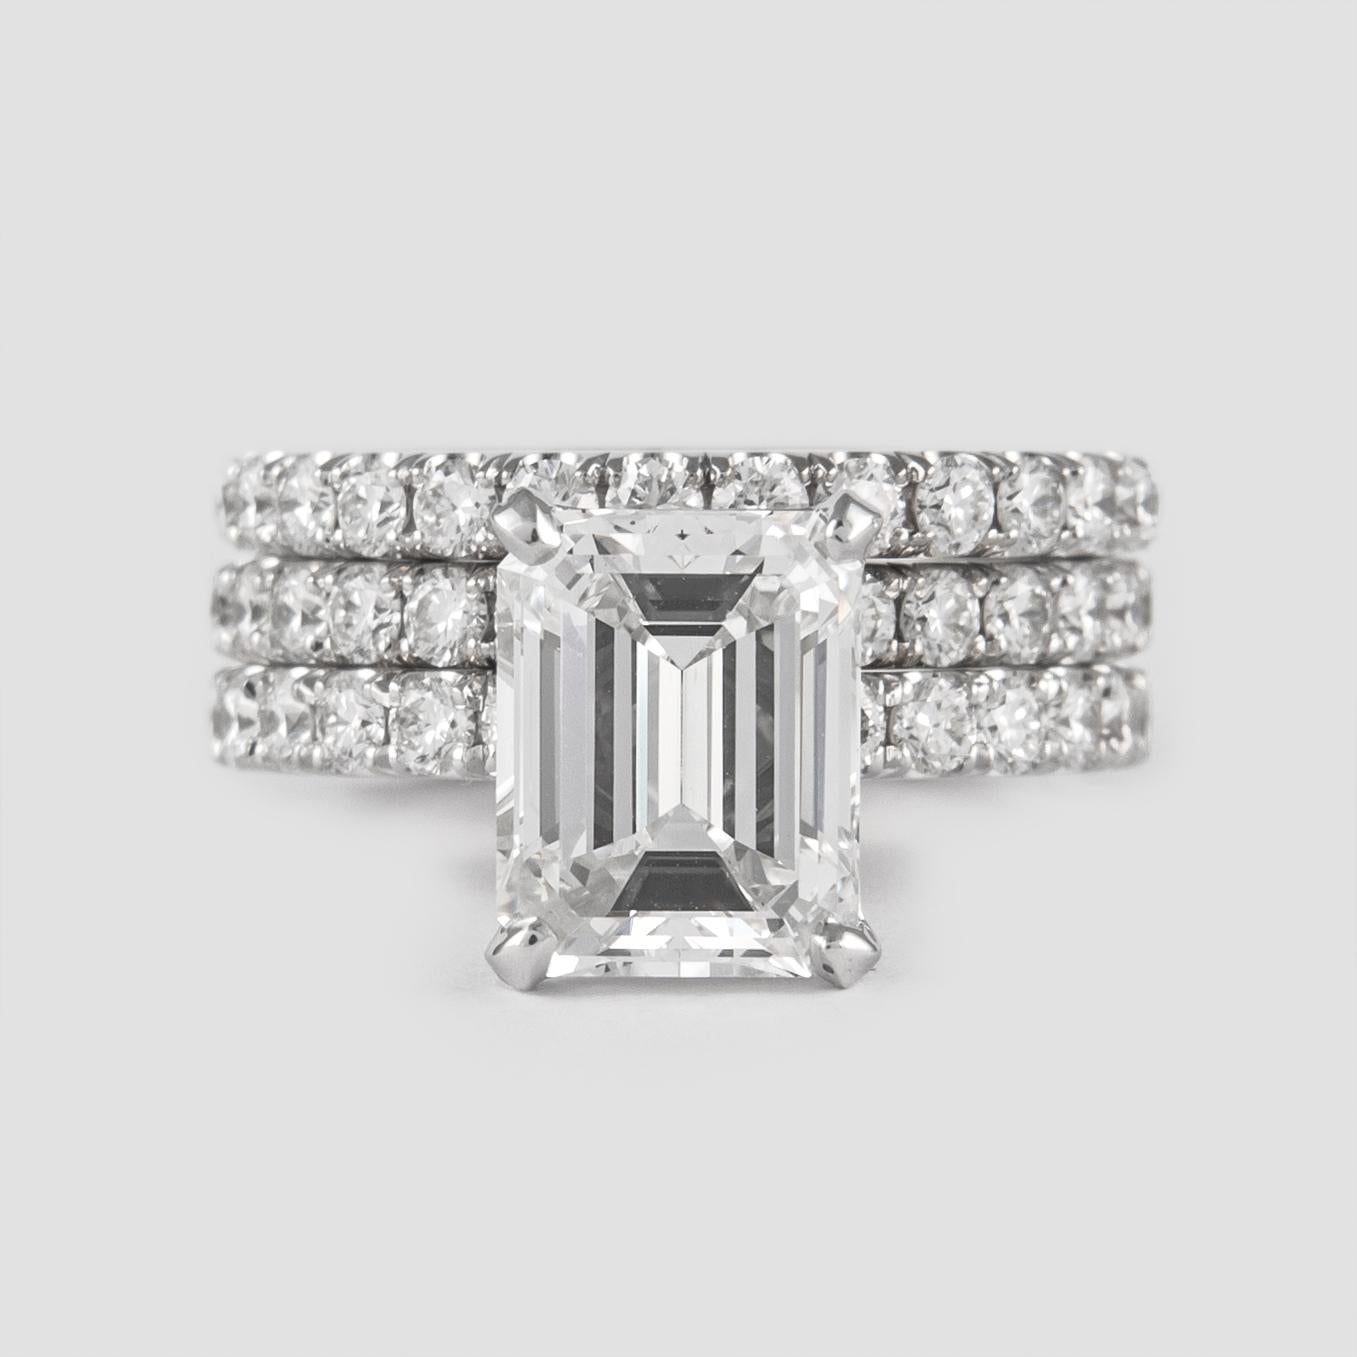 Stunning and classic diamond engagement ring with two eternity bands, GIA certified. 
High jewelry by Alexander Beverly Hills.
Center stone, 3.16ct emerald cut diamond. F color grade & VS1 clarity grade, GIA certified. Side stones, 40 round